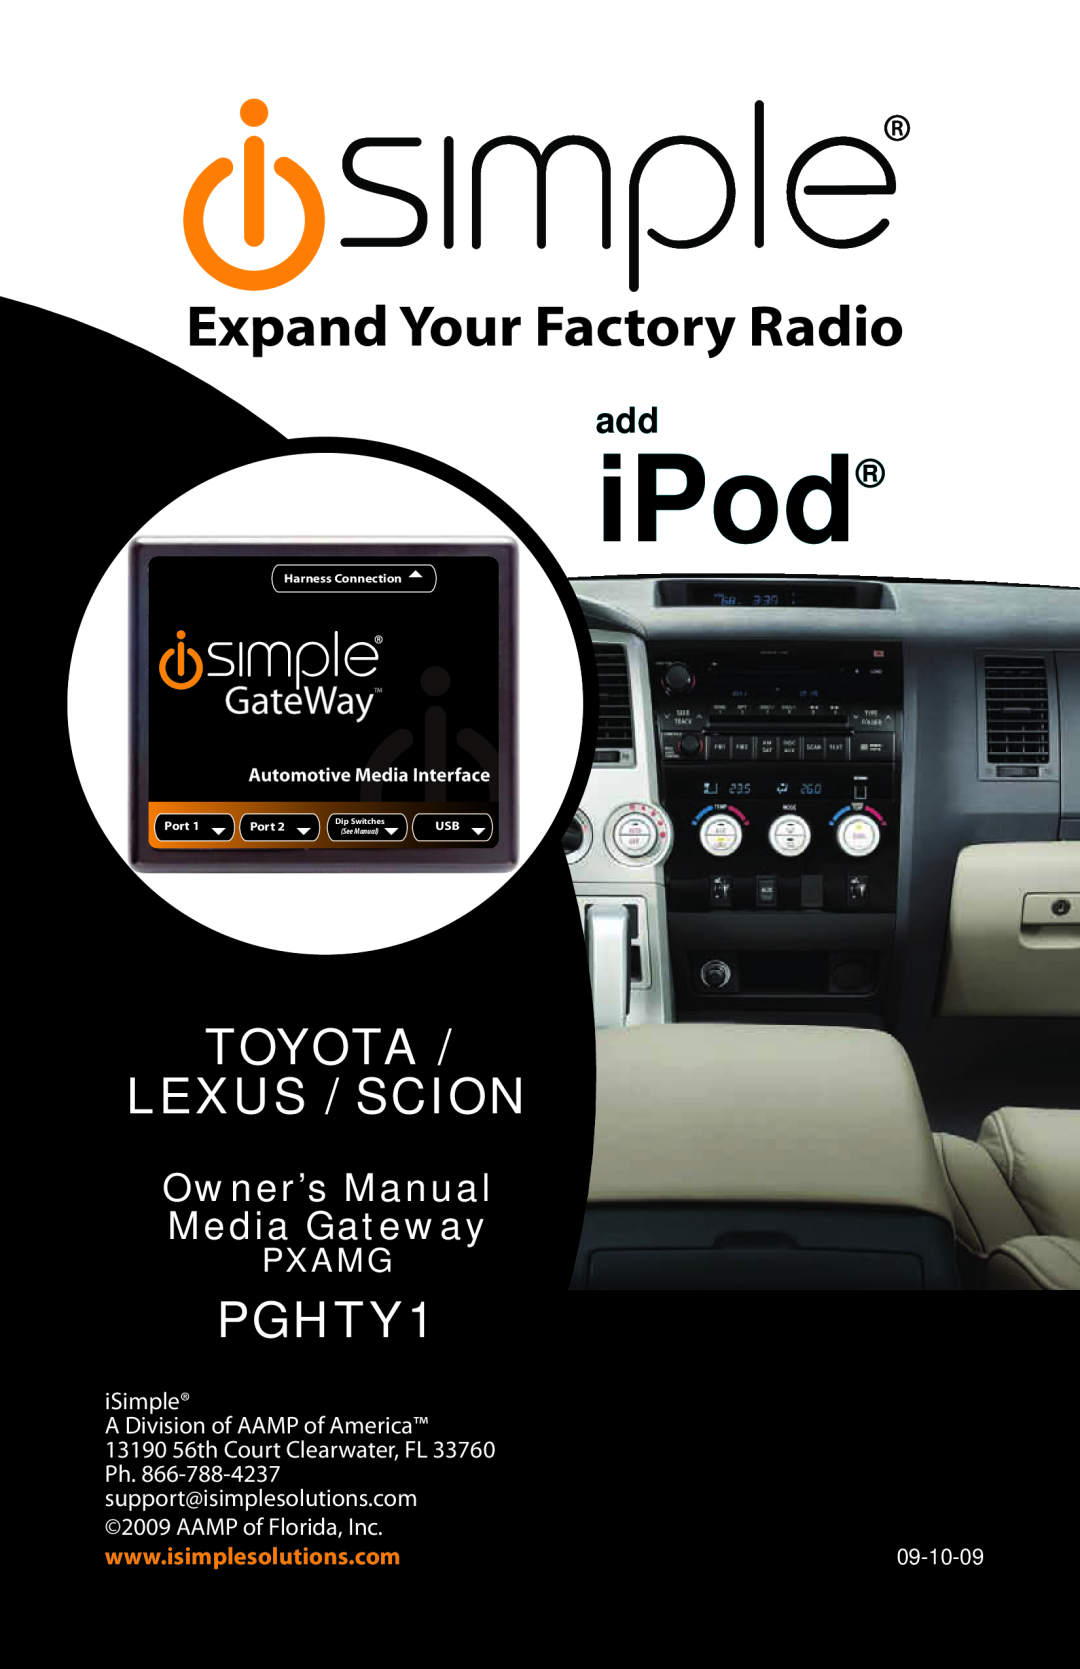 iSimple PGHTY1 owner manual iPod, Expand Your Factory Radio, TOYOTAOwner’s LEXUSManual/ SCION, iSimple, iSimple 